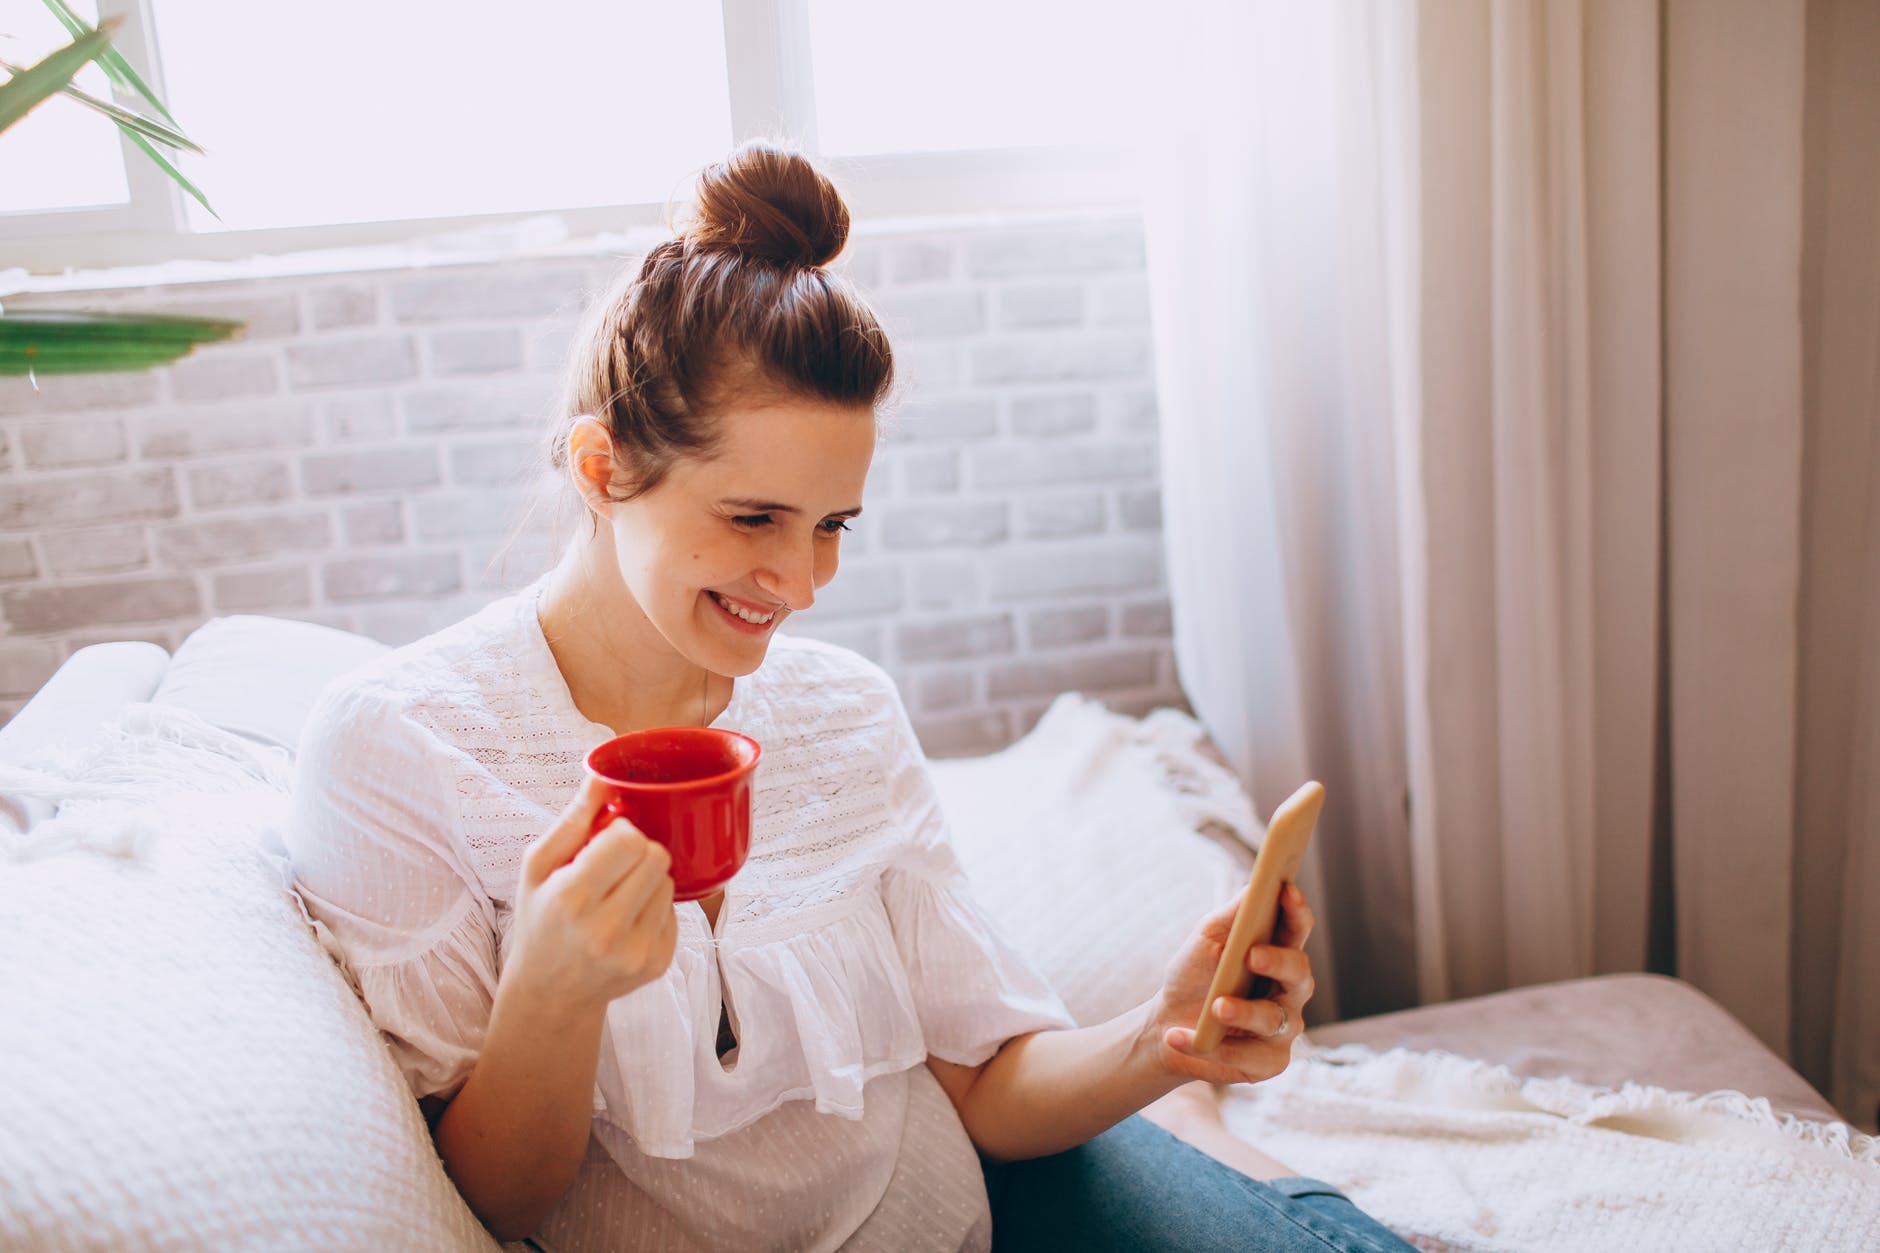 smiling woman with cup of coffee using smartphone